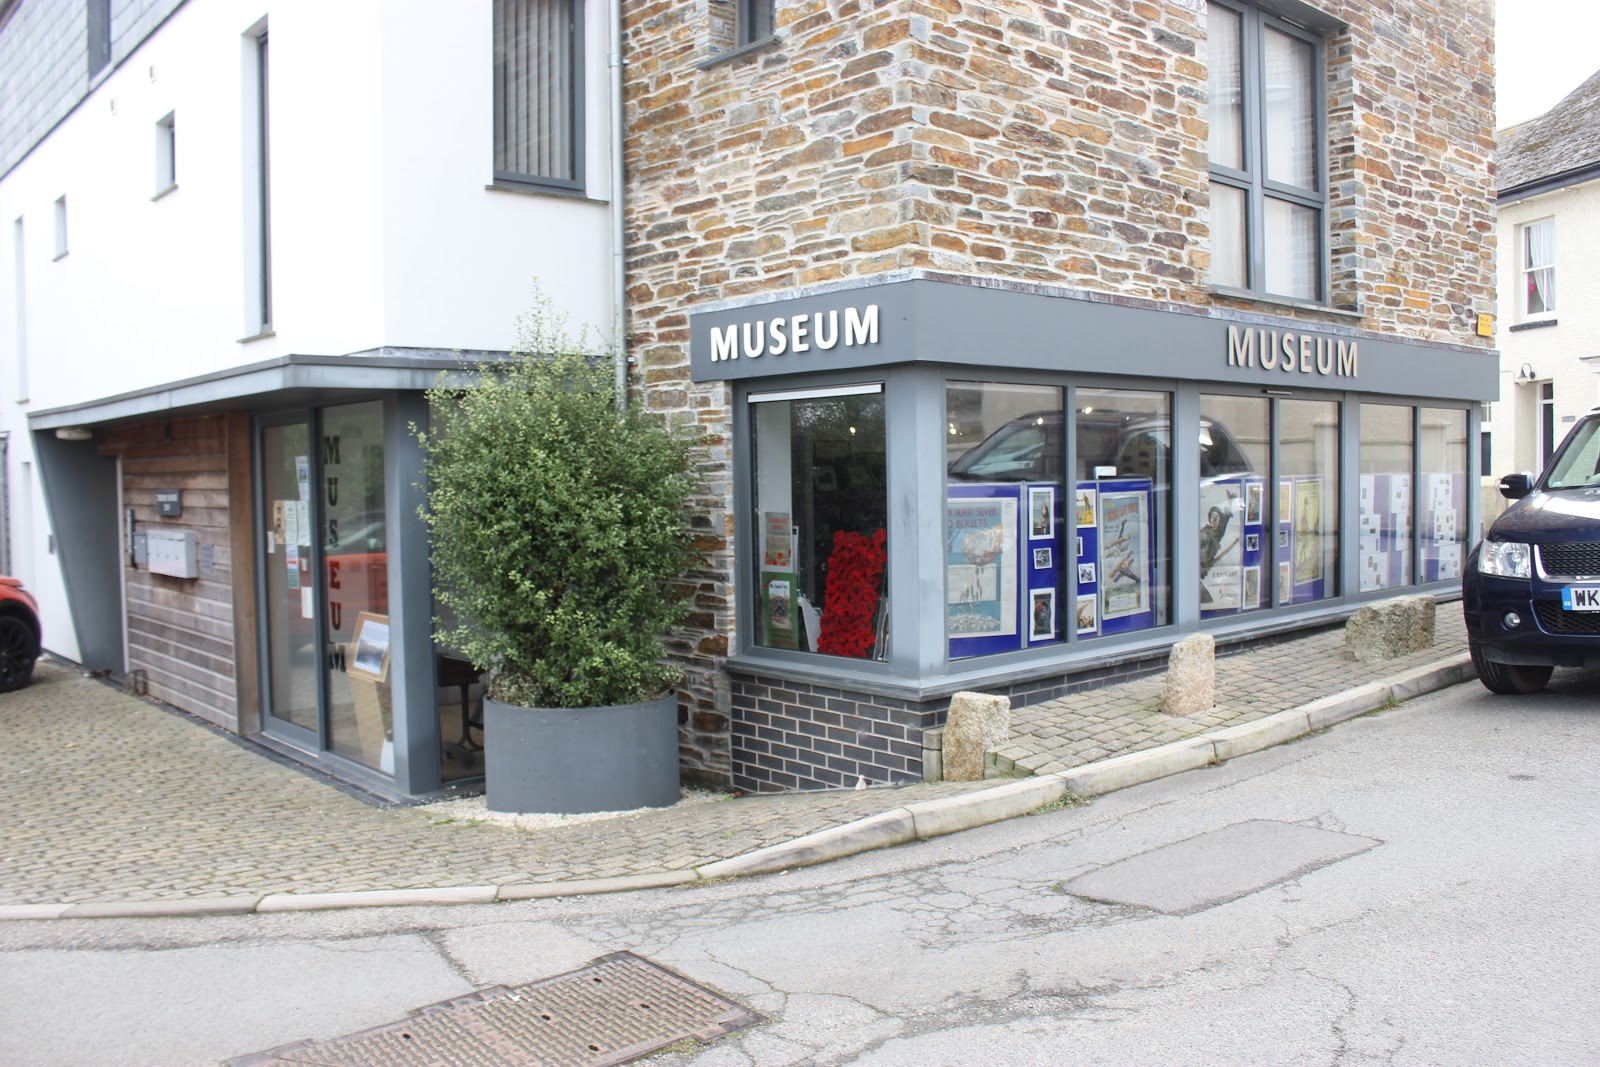 https://whatremovals.co.uk/wp-content/uploads/2022/02/Wadebridge and District Museum-300x200.jpeg